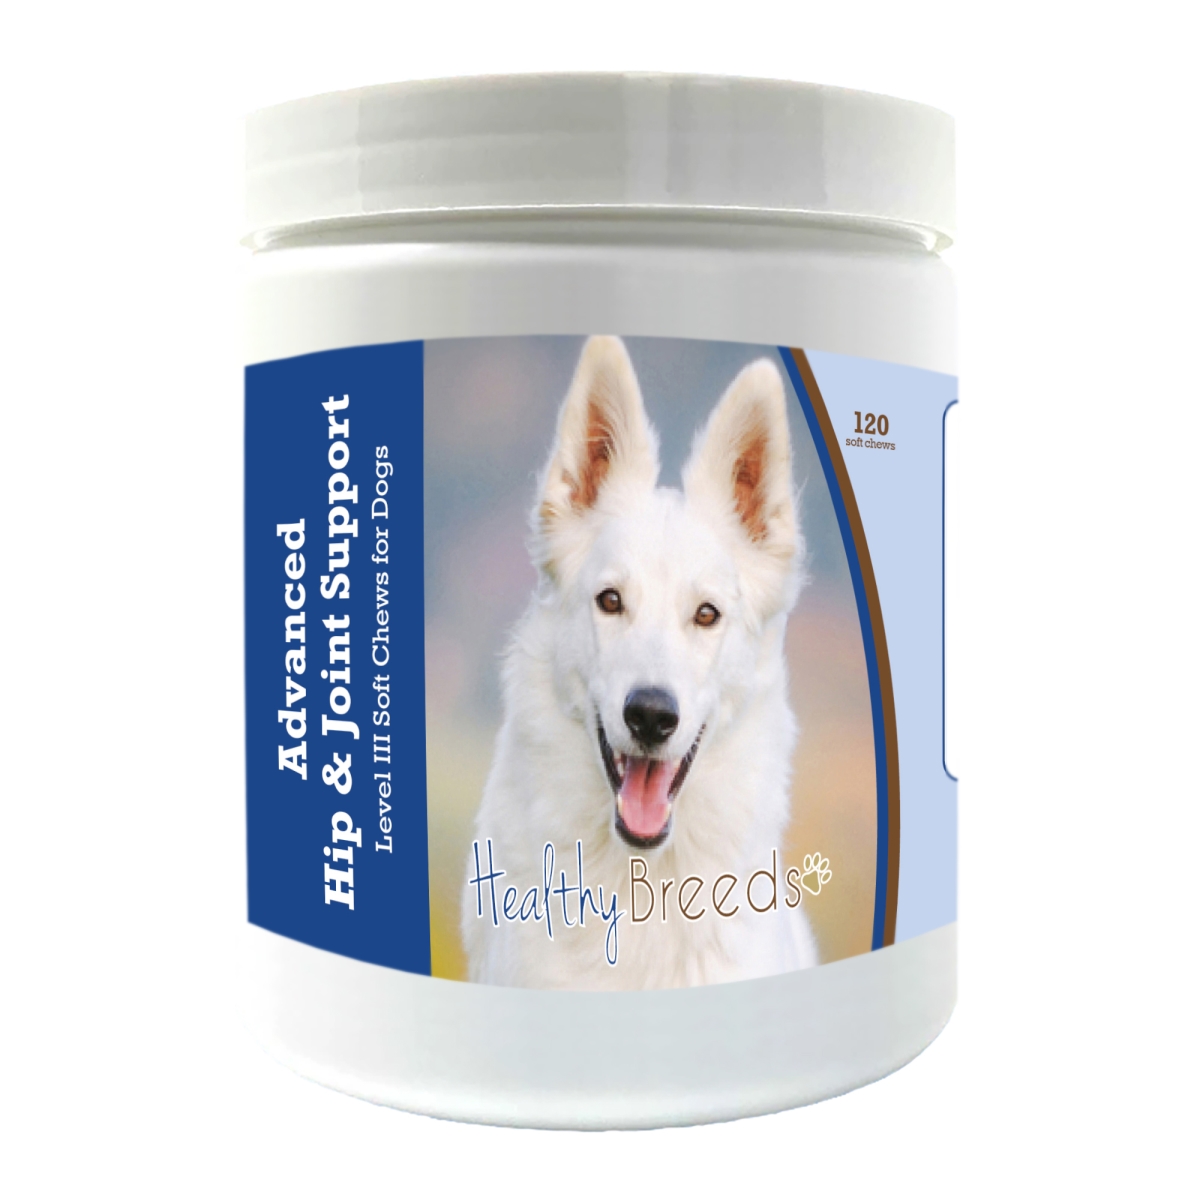 Picture of Healthy Breeds 192959898354 German Shepherd Advanced Hip & Joint Support Level III Soft Chews for Dogs